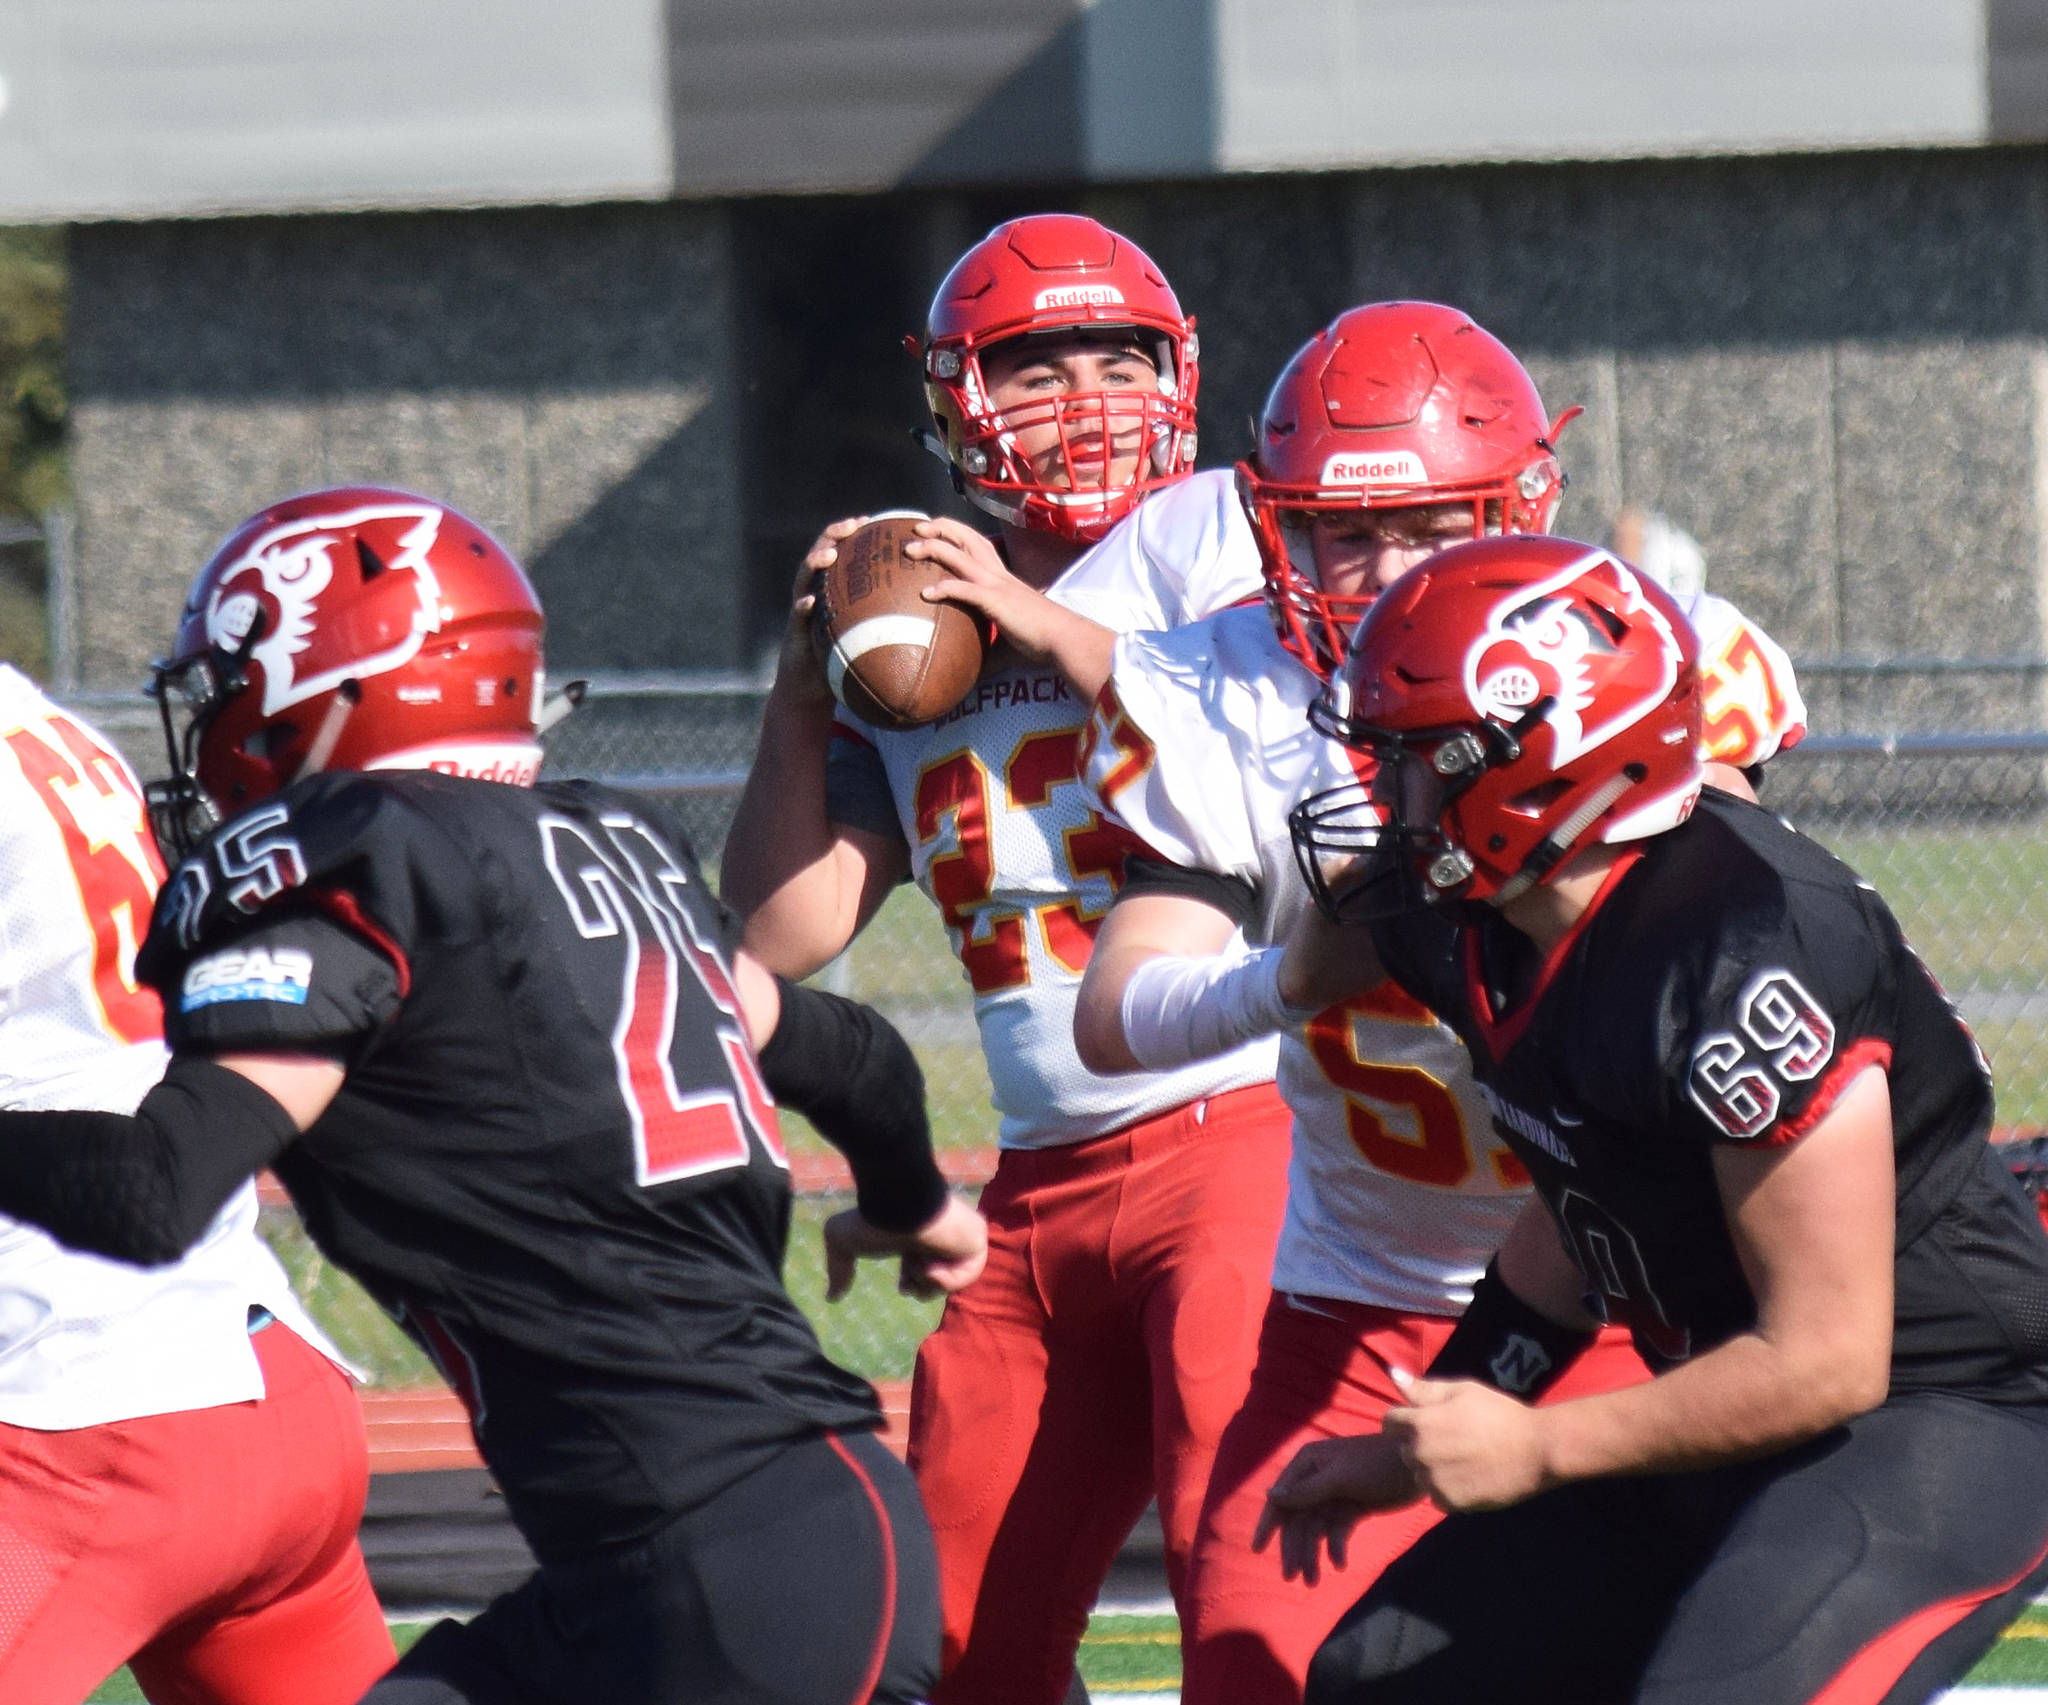 West Valley quarterback Shaun Conwell eyes a receiver downfield Saturday, Sept. 14, 2019, against Kenai Central at Ed Hollier Field in Kenai, Alaska. (Photo by Joey Klecka/Peninsula Clarion)